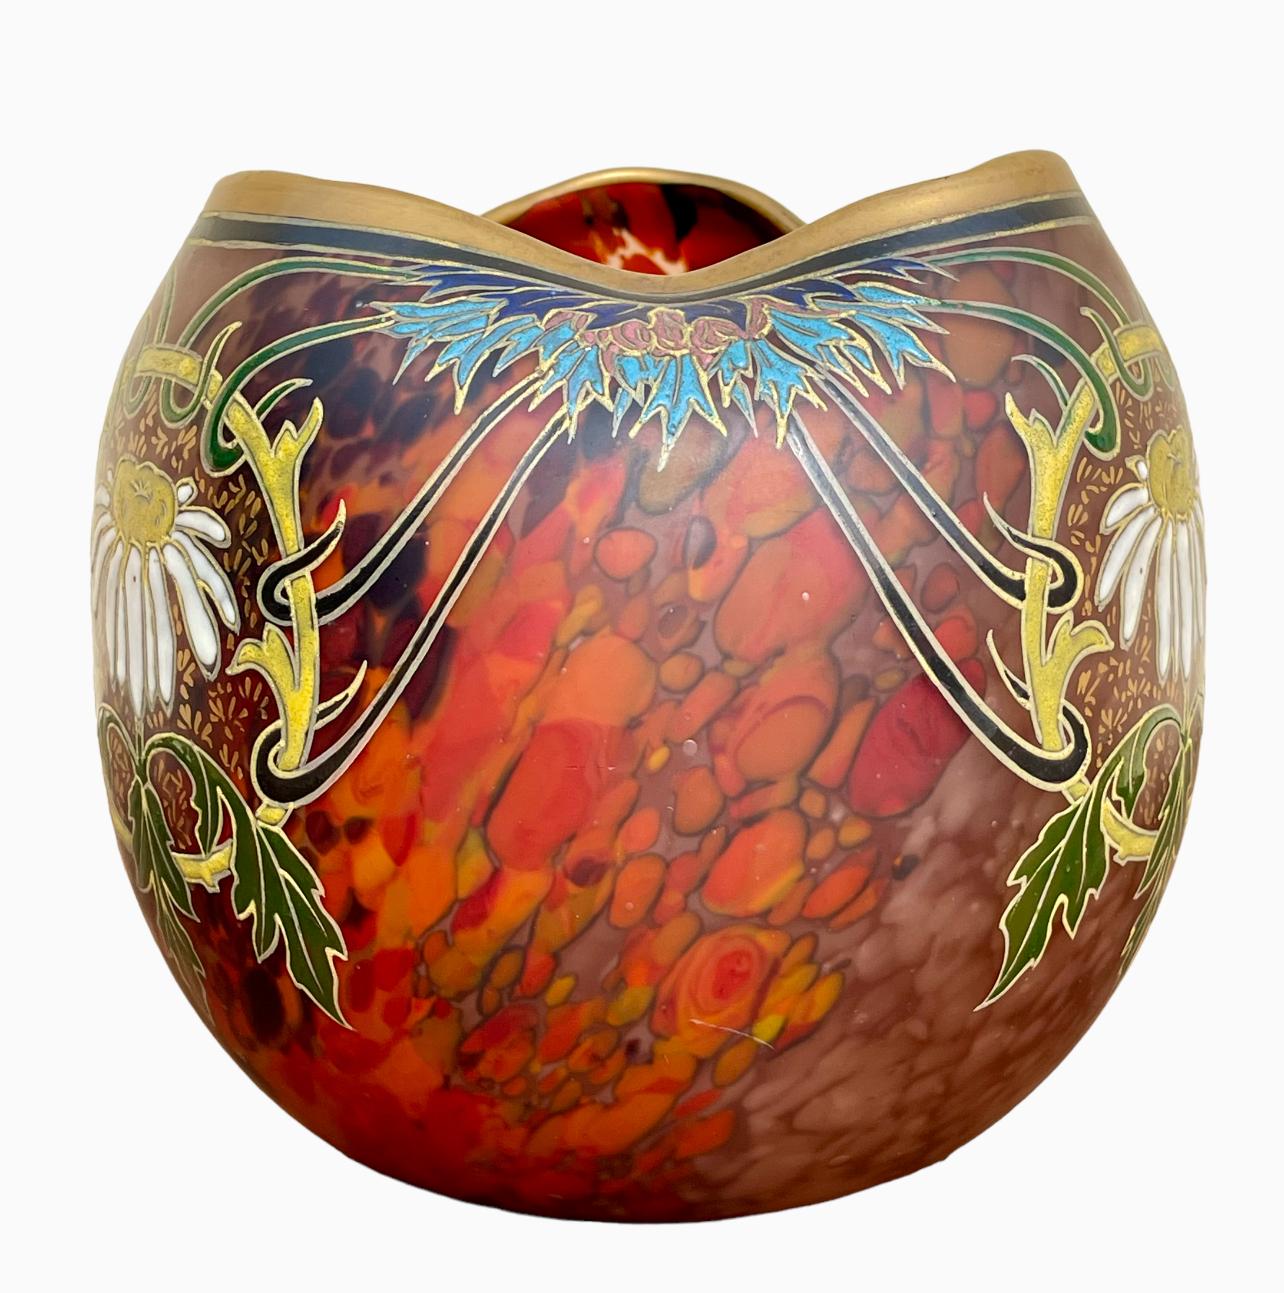 LEGRAS - Ball Vase With Polylobed Neck  In Good Condition For Sale In Beaune, FR